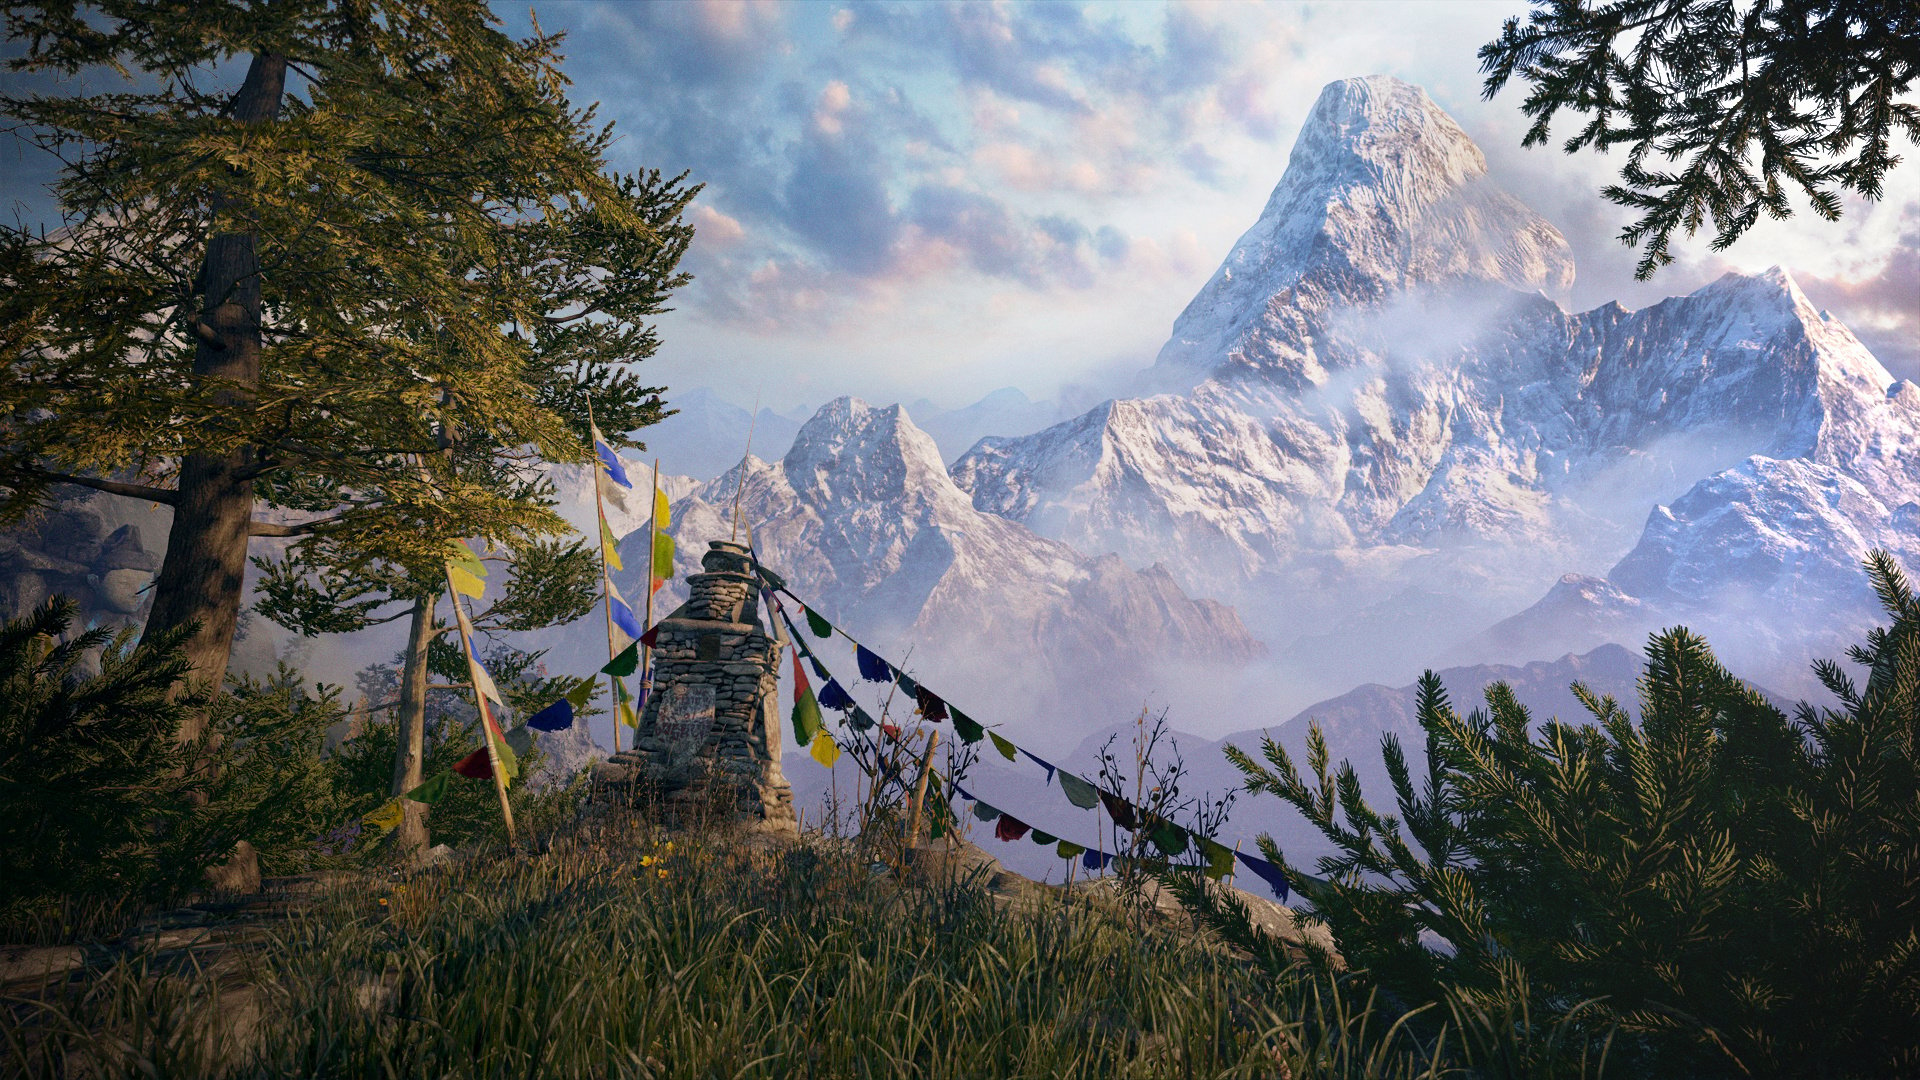 Far Cry 4 (PS4 / PlayStation 4) Game Profile | News, Reviews, Videos